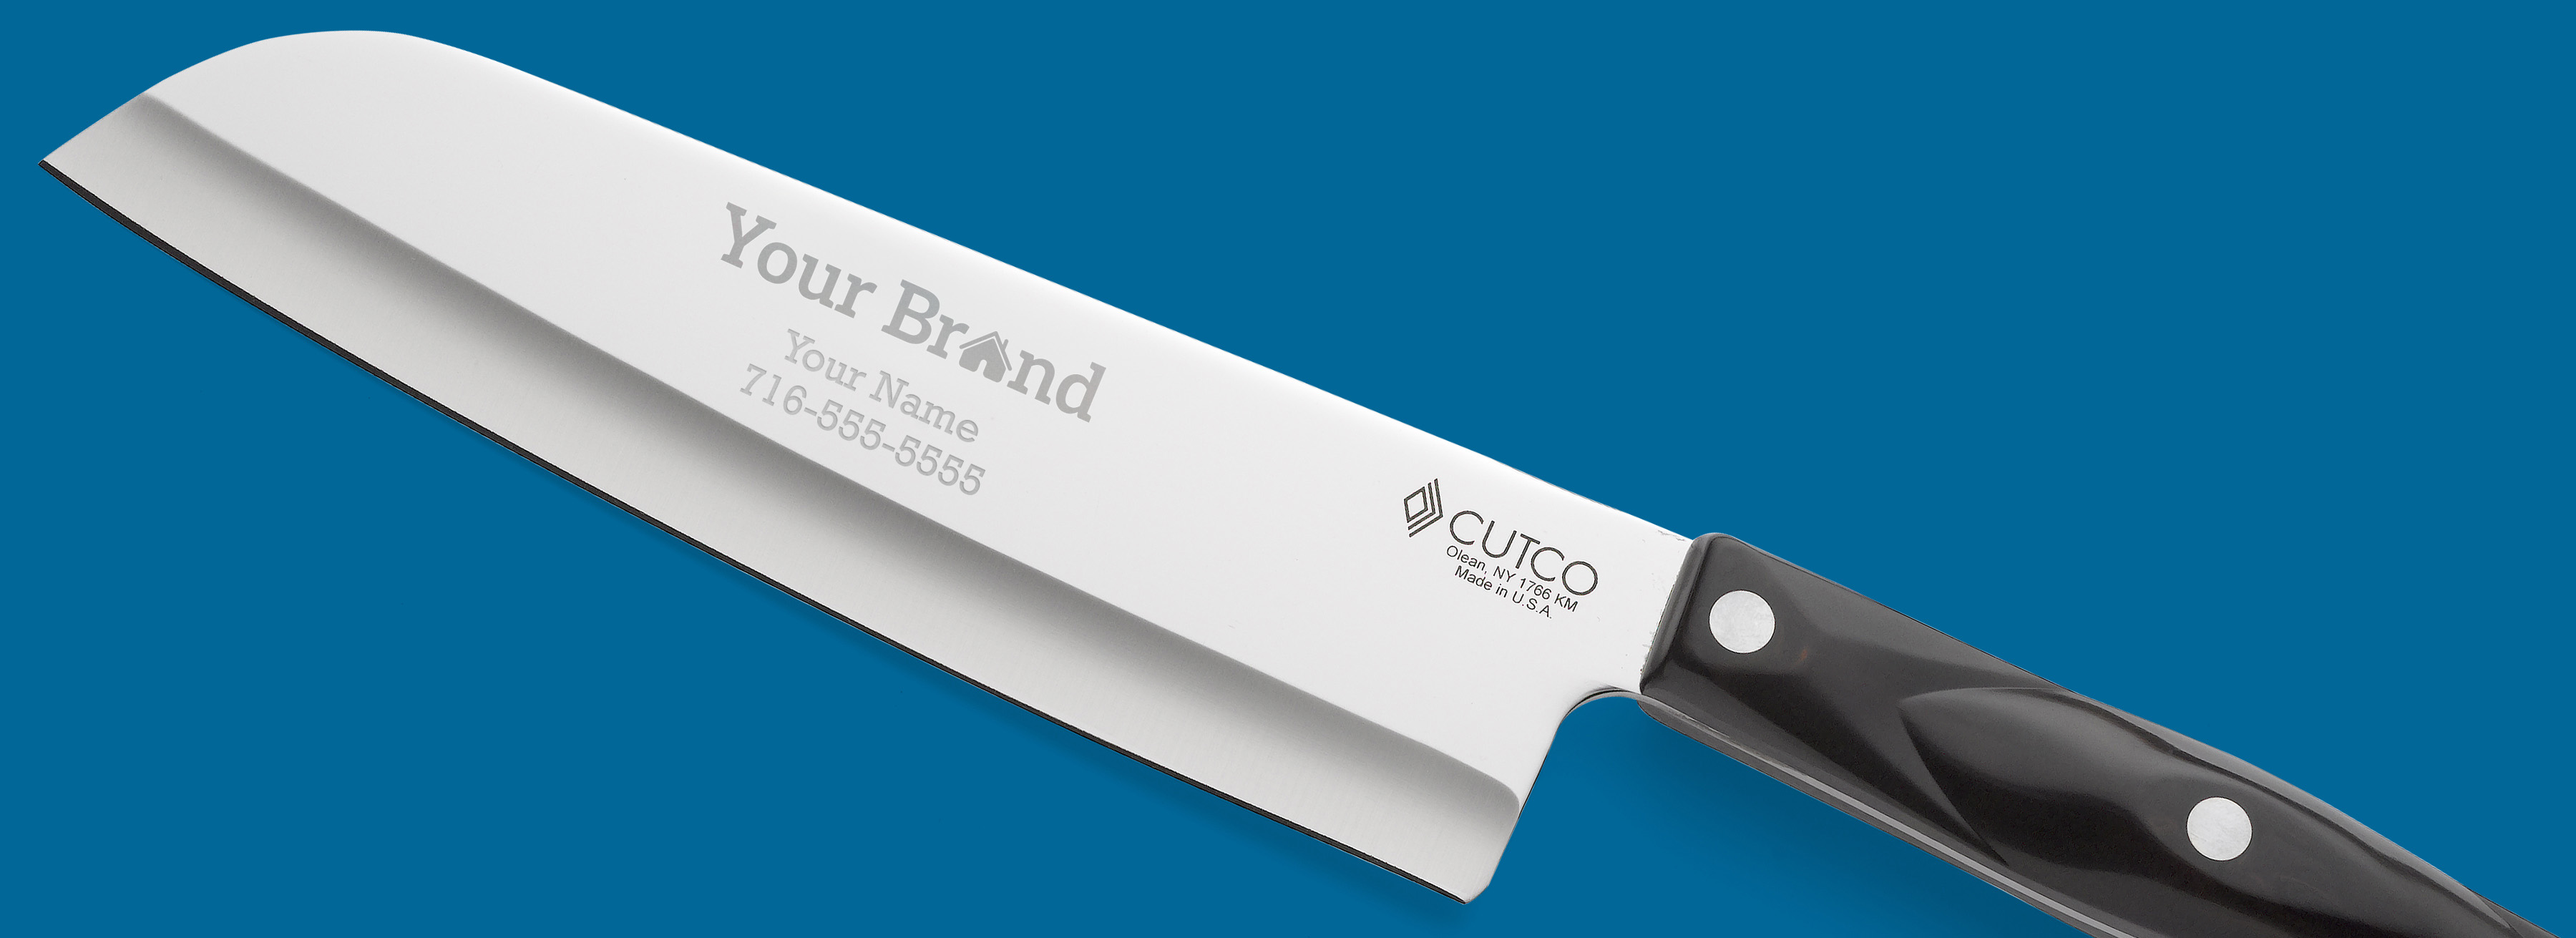 A cutco knife with the ReMax logo, name and phone number engraved on the blade.